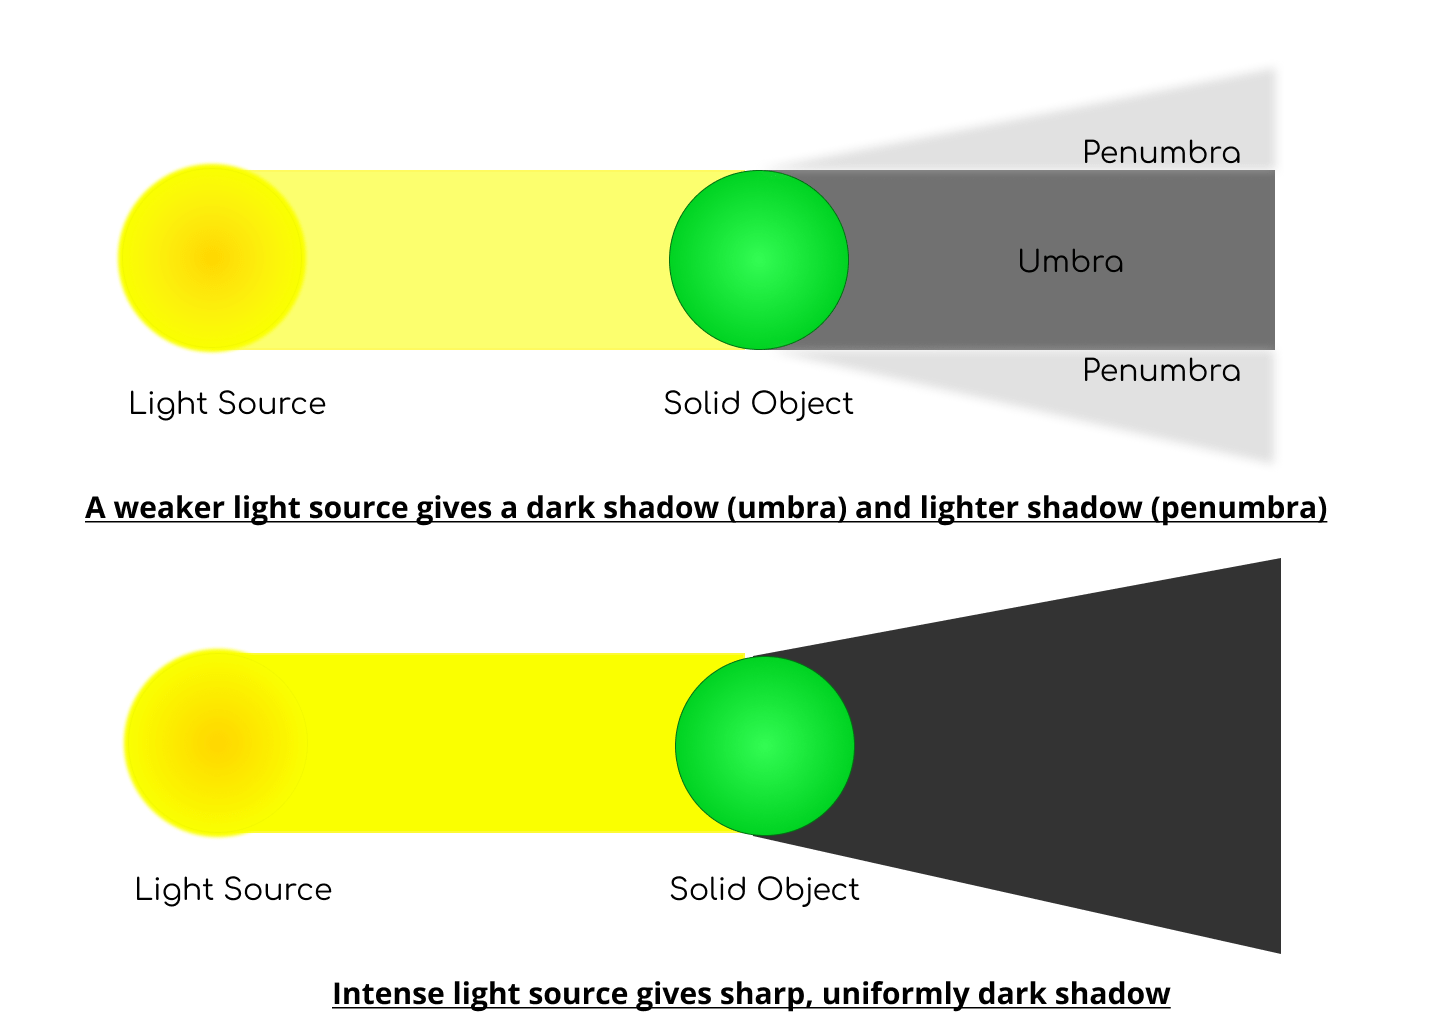 Two vertically stacked illustrations.The top is a green circle with a yellow light source coming at it from the left and both umbra and penumbra shadows are cast to the right. The bottom illustration is the same green circle and light source, but with a solid black shadow cast to the right.